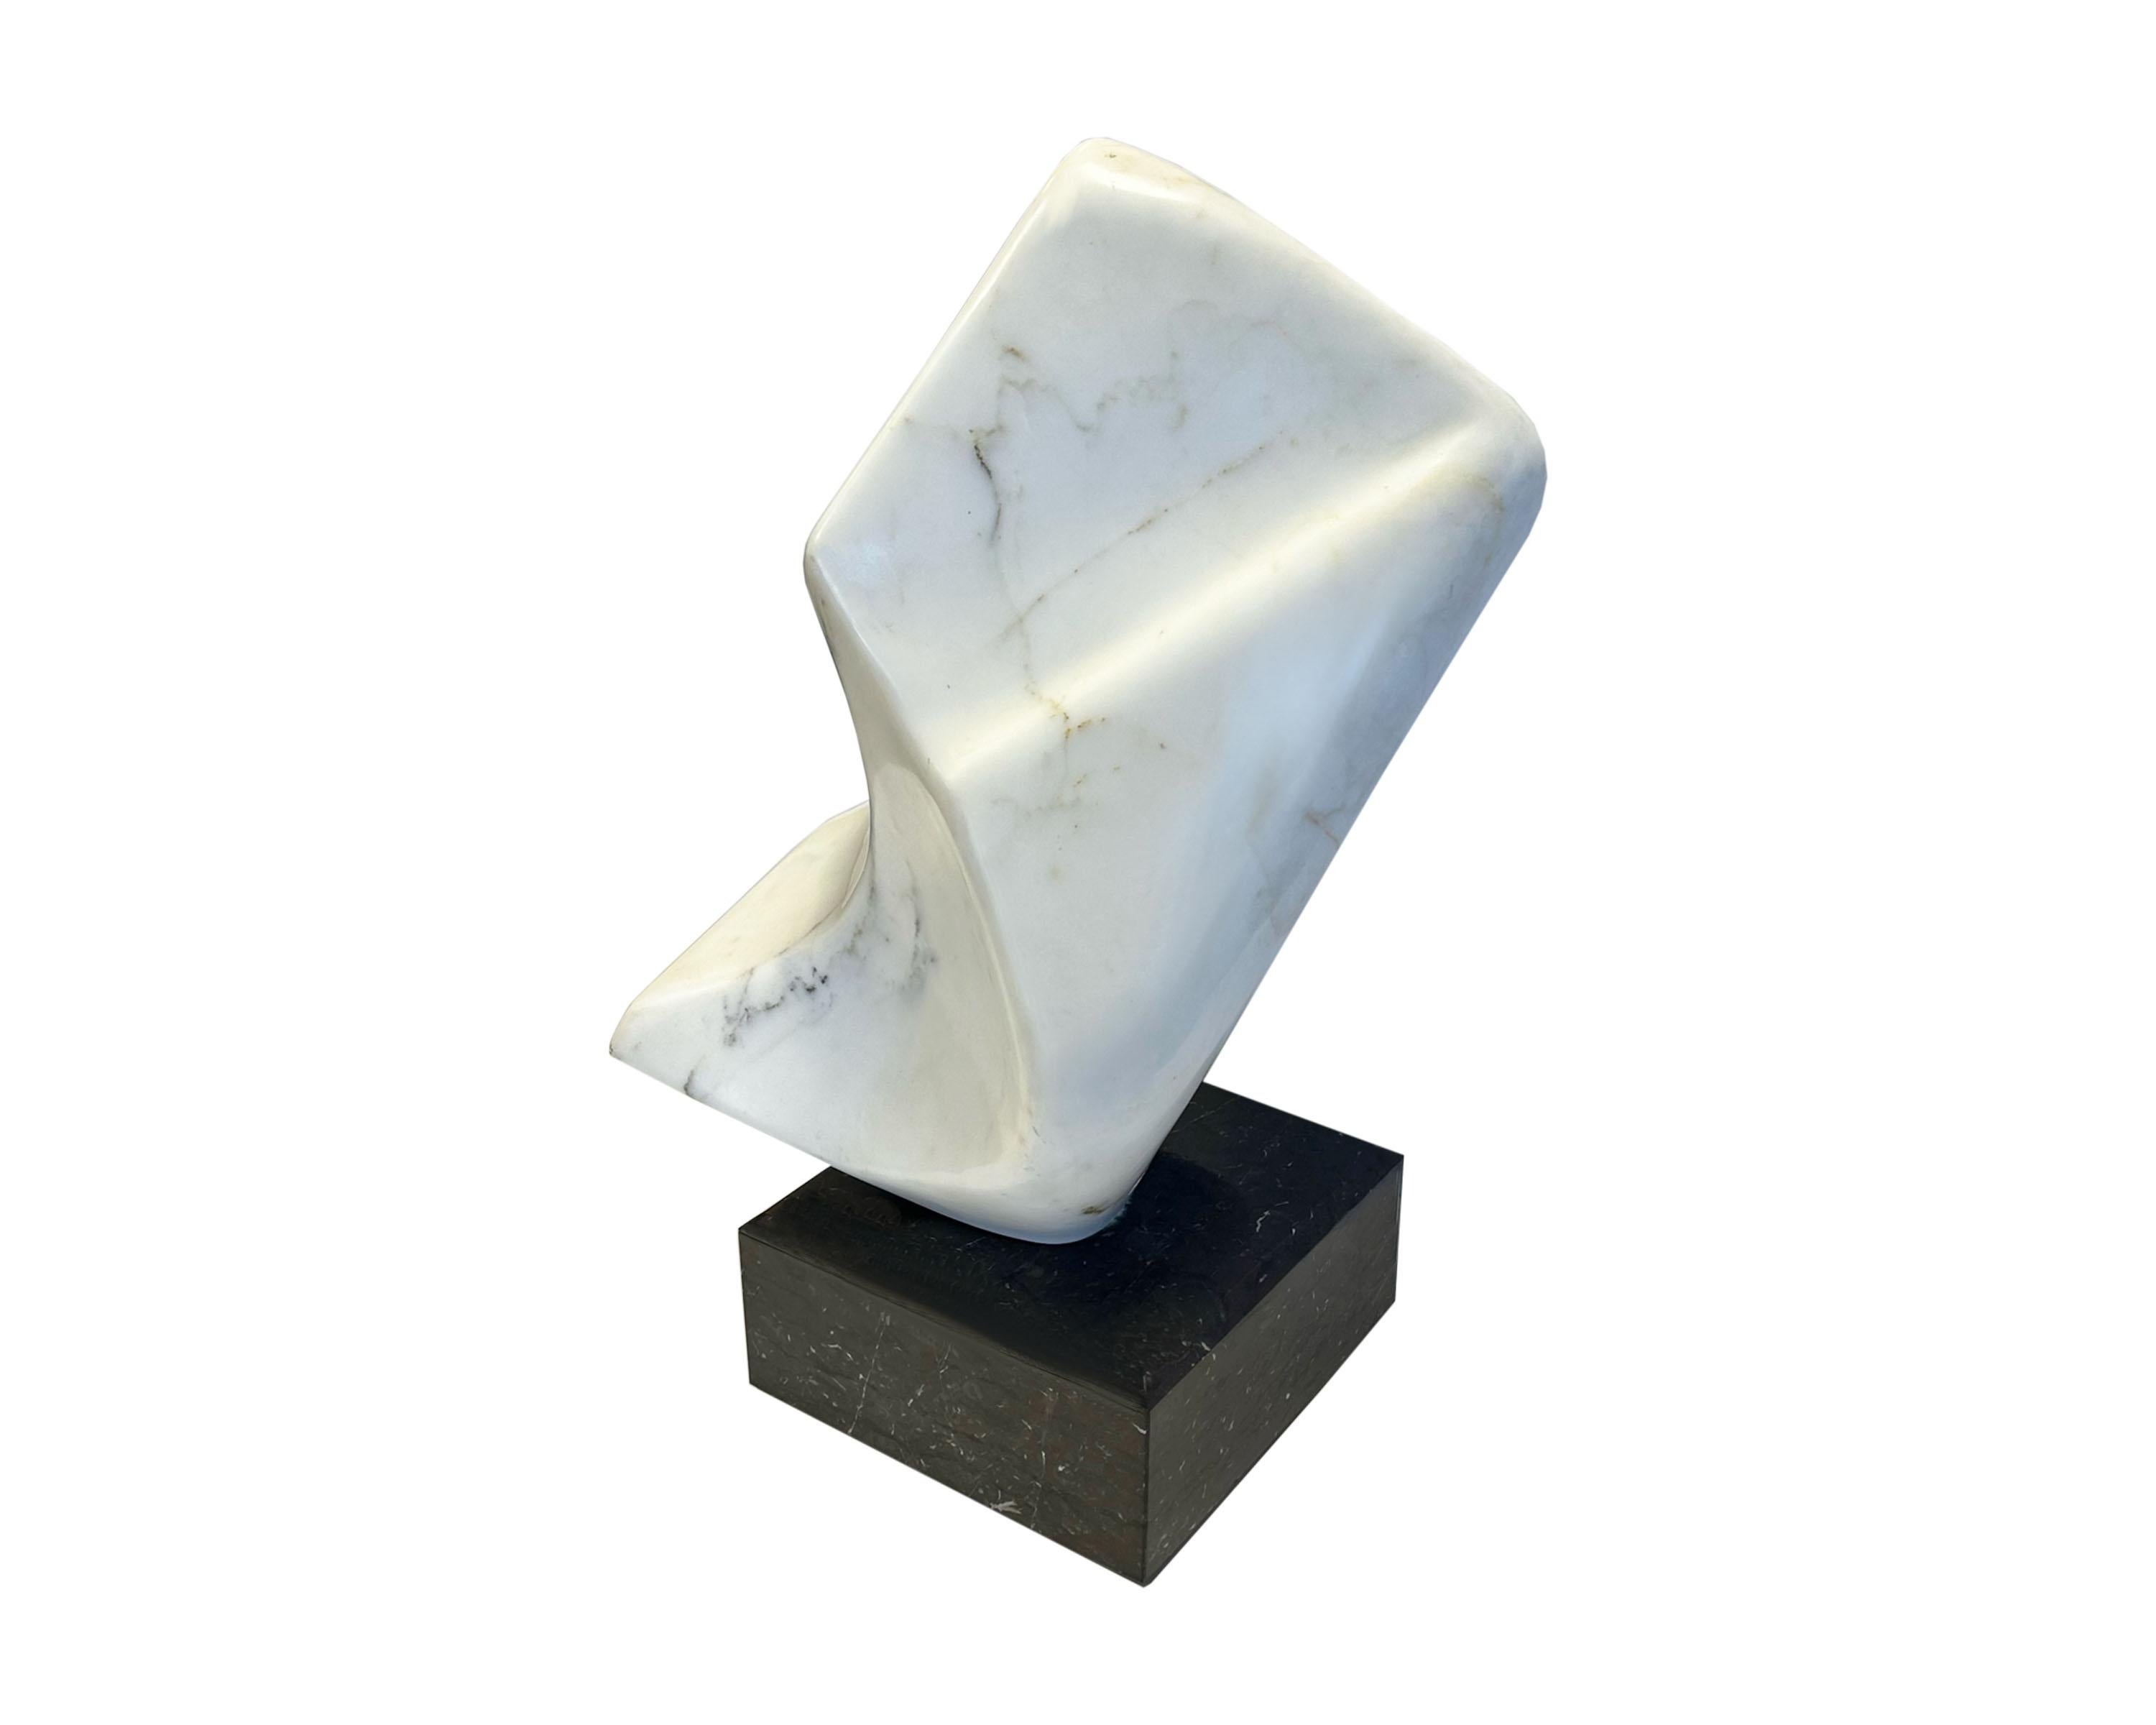 A 1990 stone sculpture by the American artist John Bartolomeo (1923-2012). Carved from solid marble, this abstract work uses white marble veined with black and tan to create a biomorphic form. Attached to a solid black marble base, the sculpture is